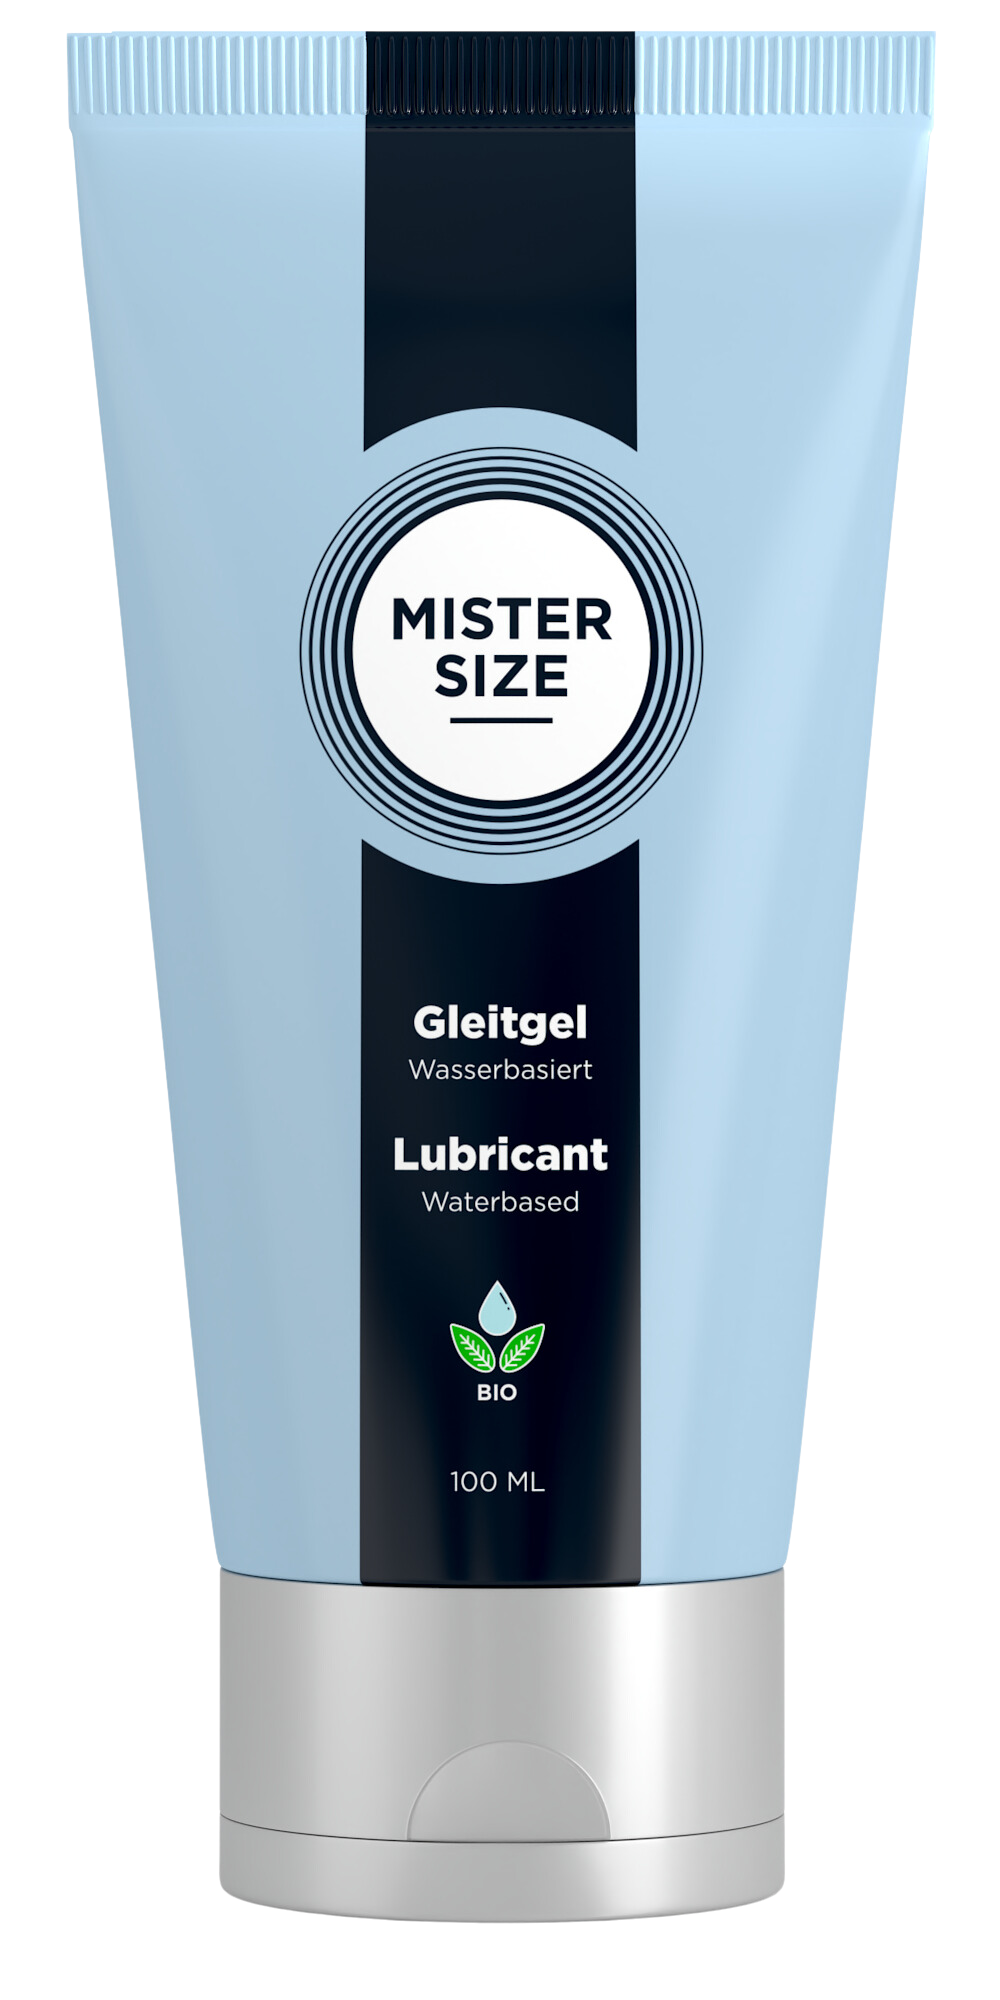 Mister Size organic lubricant